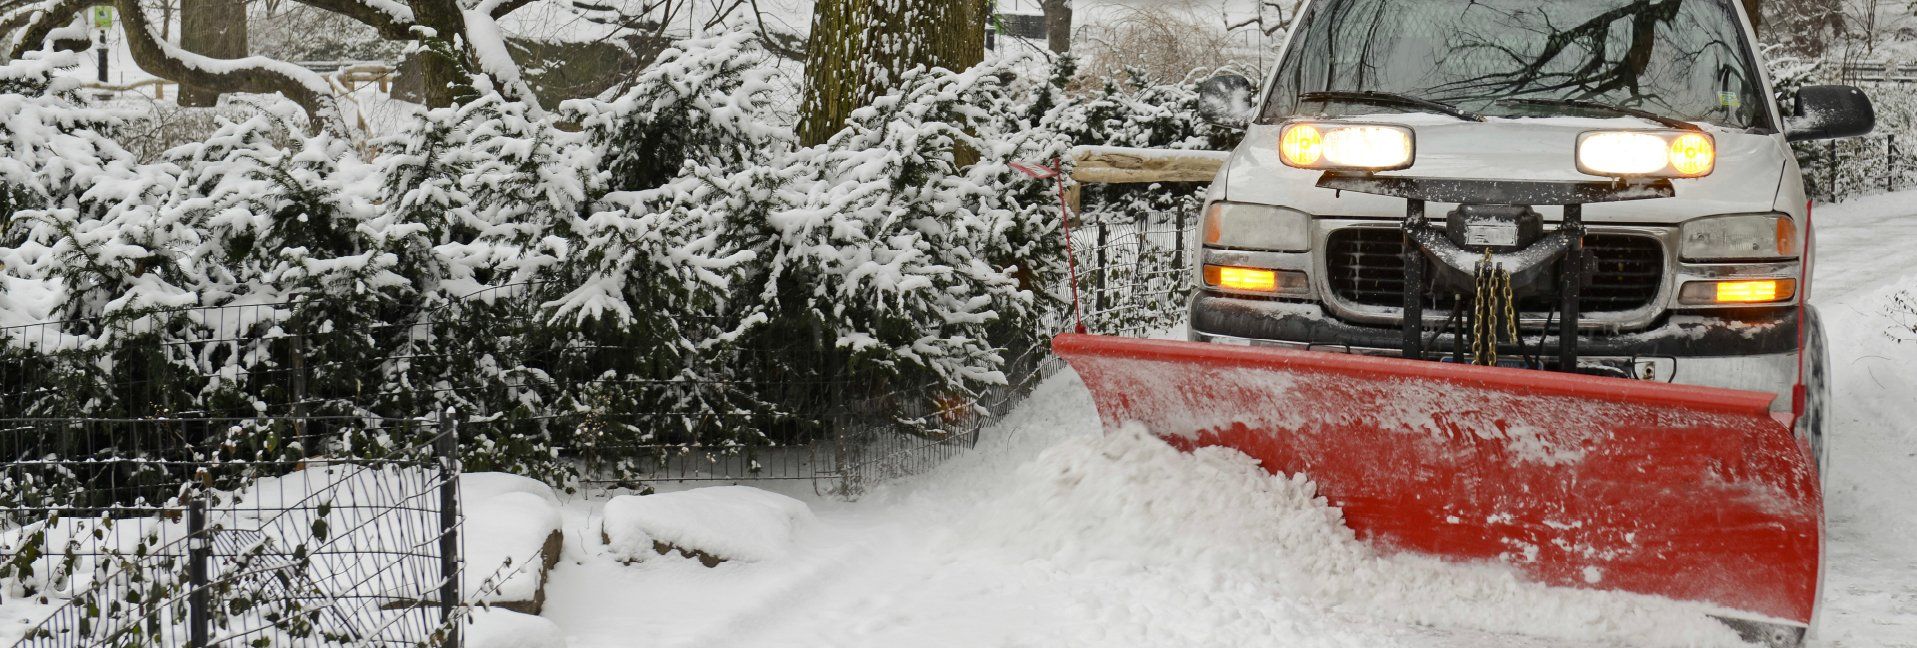 Power Through Winter’s Kiss snowplows can save the day